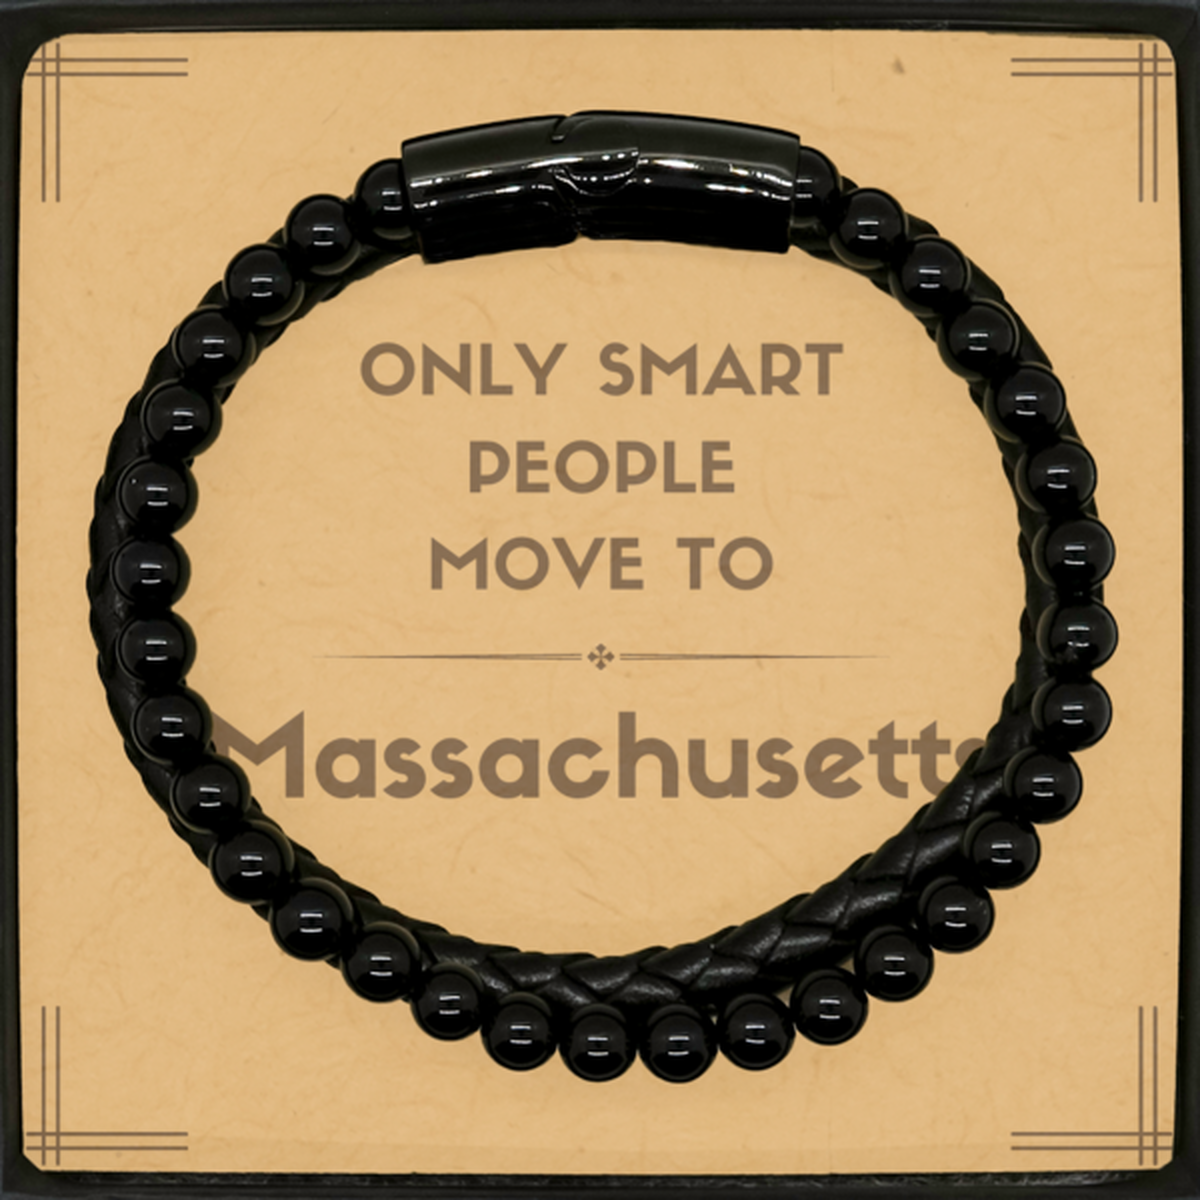 Only smart people move to Massachusetts Stone Leather Bracelets, Message Card Gifts For Massachusetts, Move to Massachusetts Gifts for Friends Coworker Funny Saying Quote